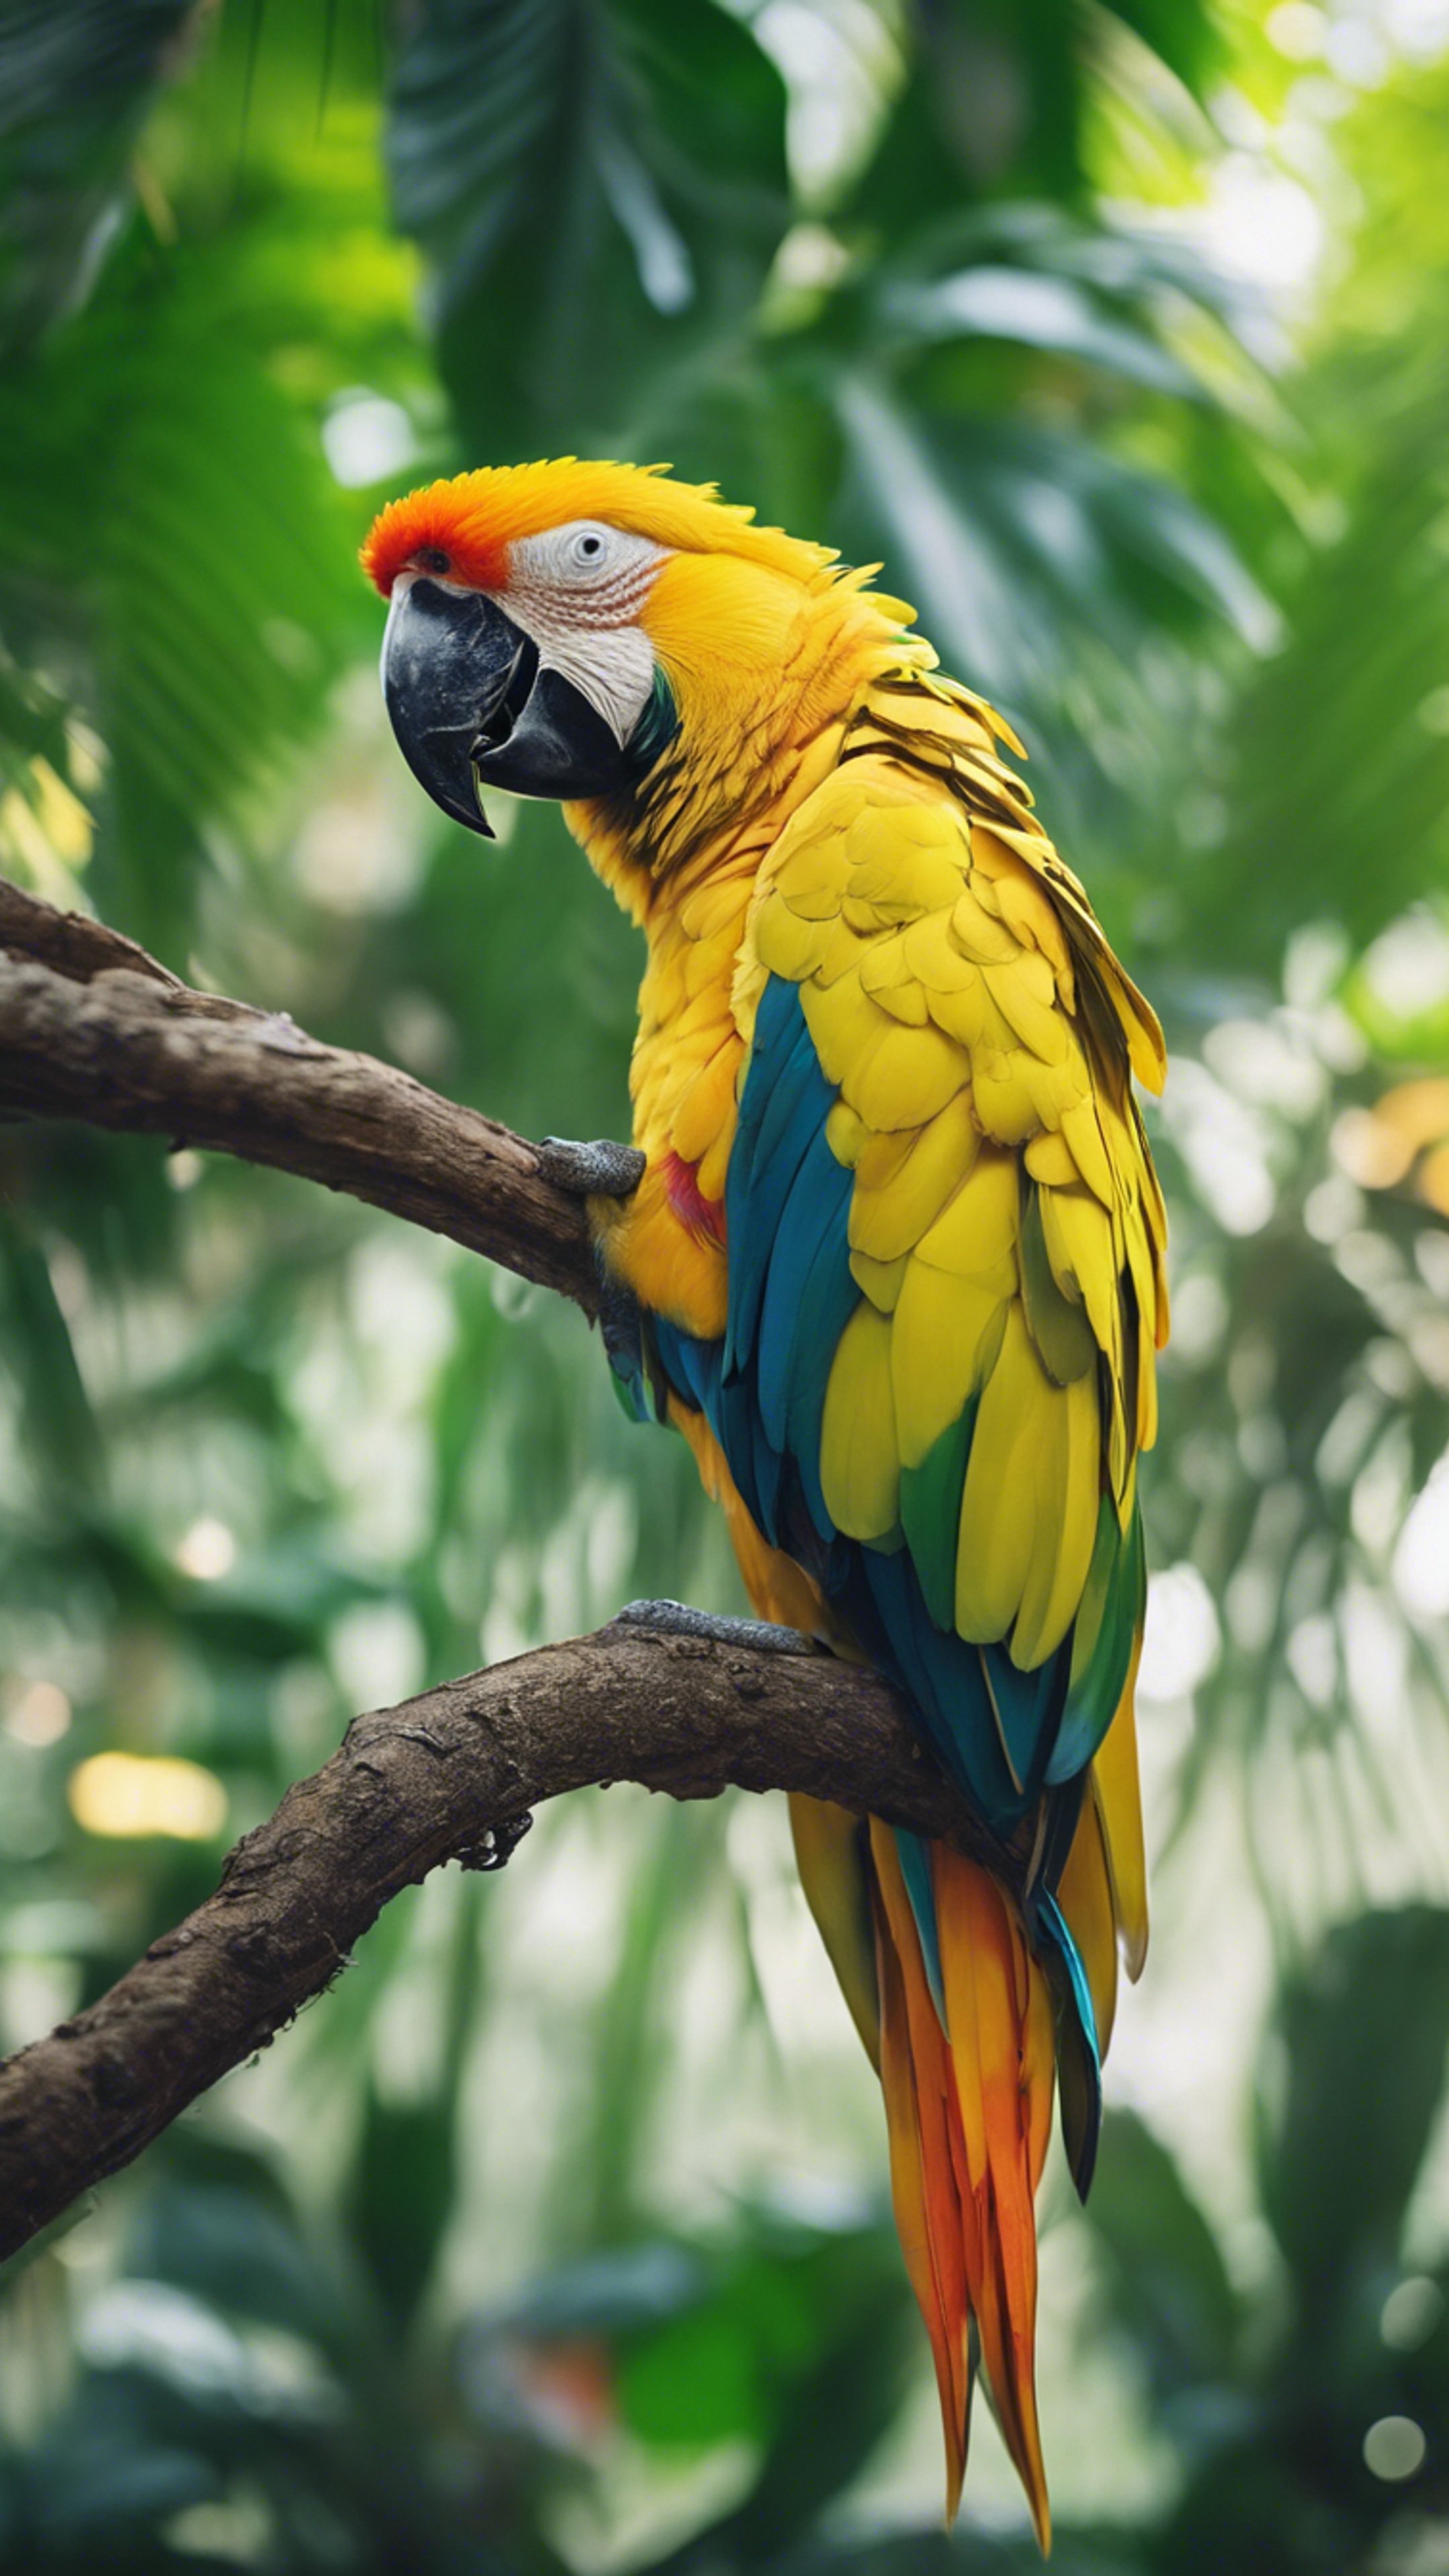 A vibrant neon yellow parrot perched on a branch in a dense jungle.壁紙[c7d23c021a074c95944c]